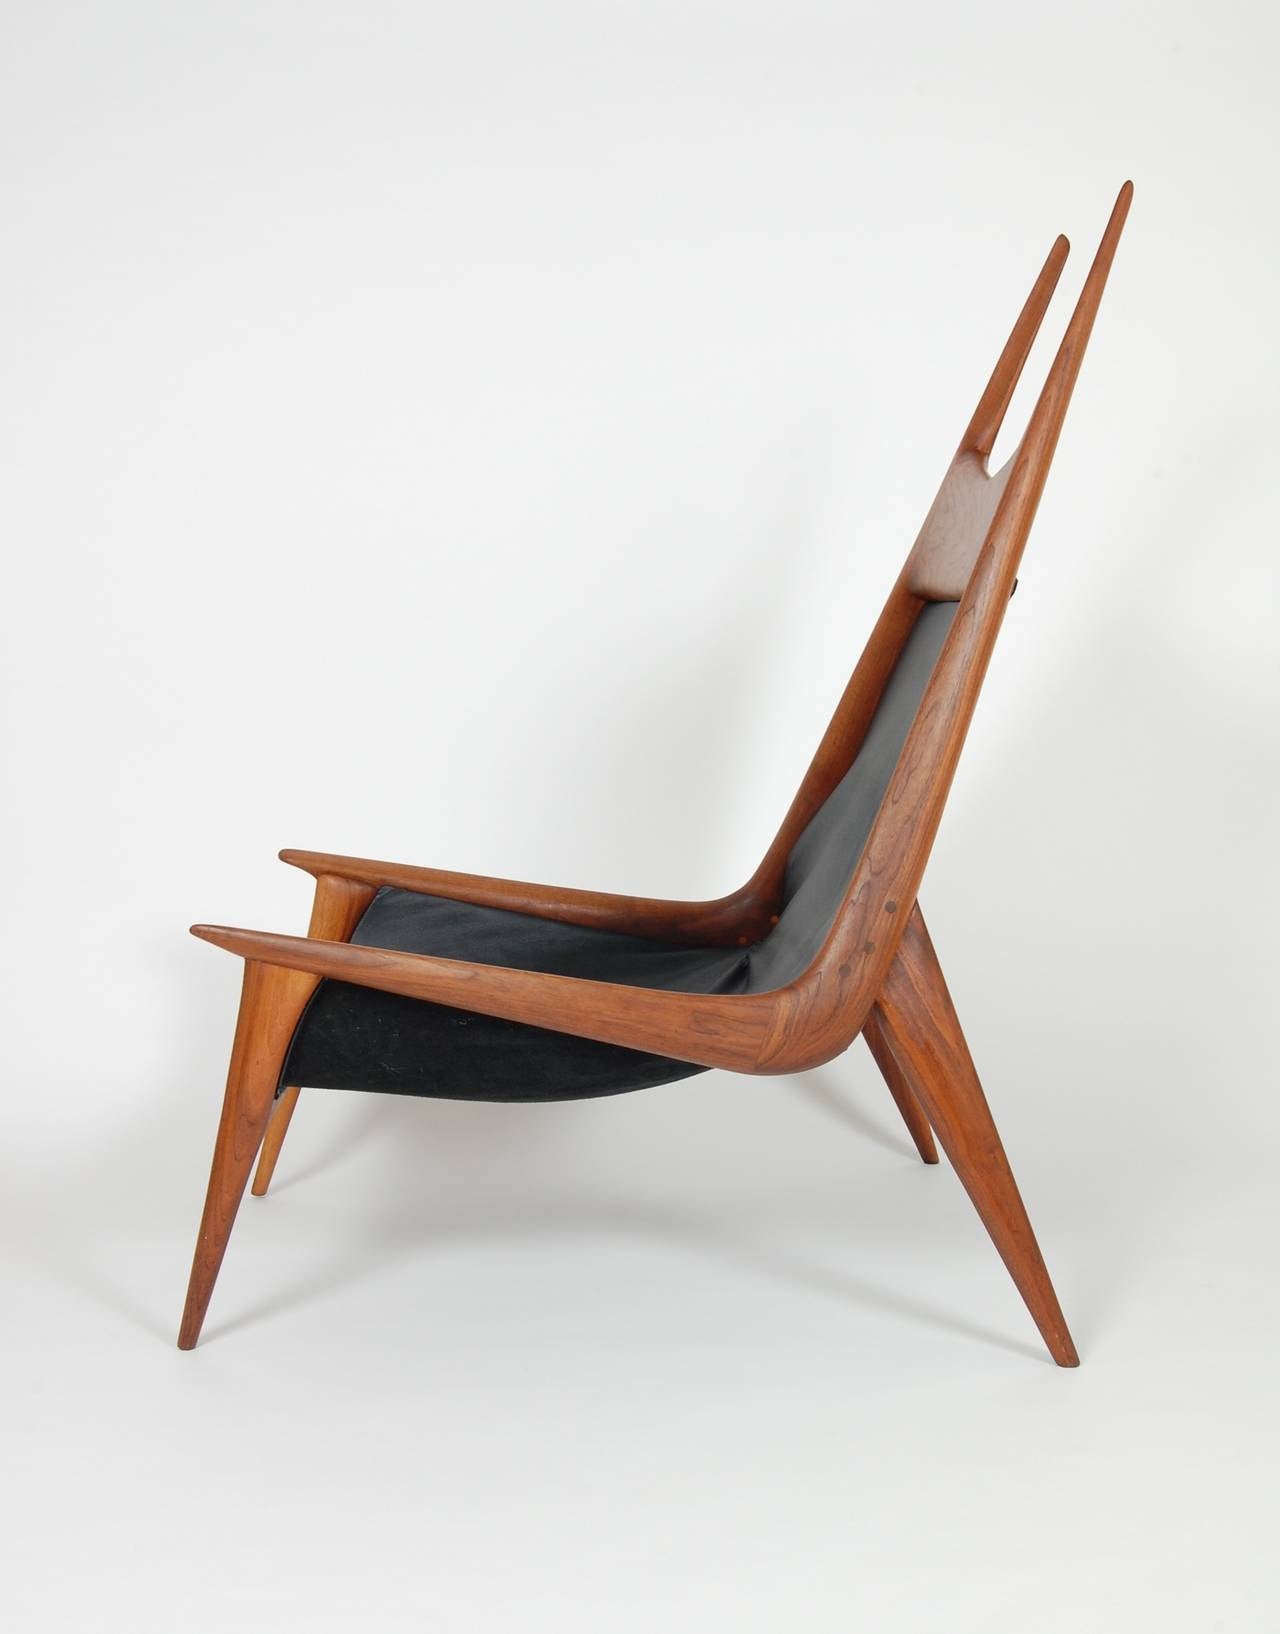 Studio craft lounge by Bay Area woodsmith Miles Karpilow, impressive scale and form, created out of an richly hued walnut with leather upholstery.